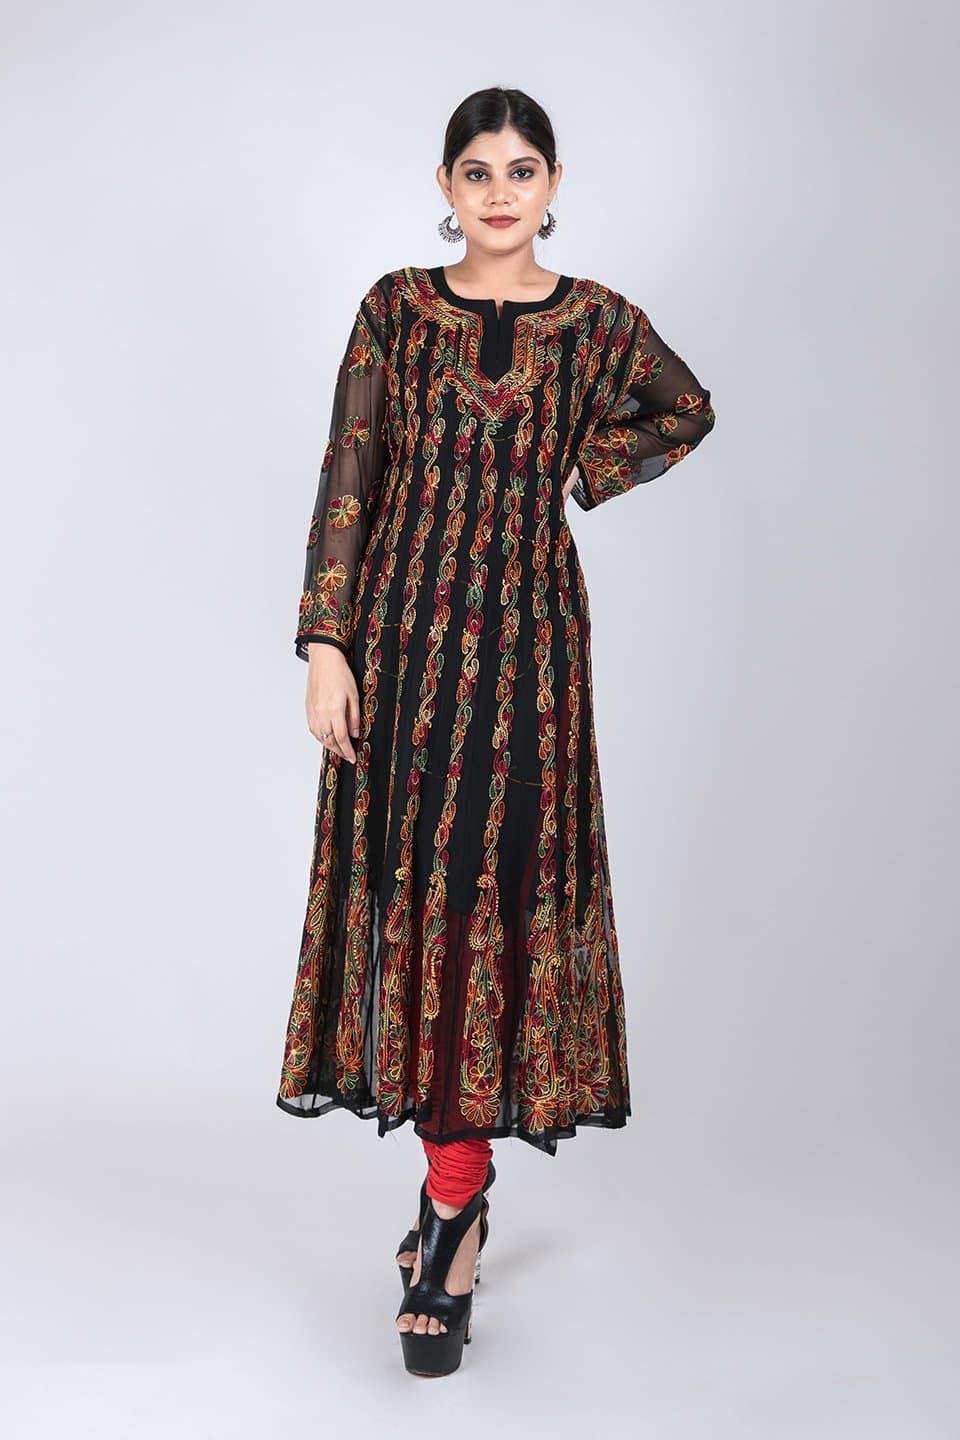 Buy Black Chikankari Short Kurta for Women Indian Embroidered Soft Cotton  Lucknowi Chikankari Top Casual Fashion Online in India - Etsy | Tops,  Casual fashion, Traditional indian dress